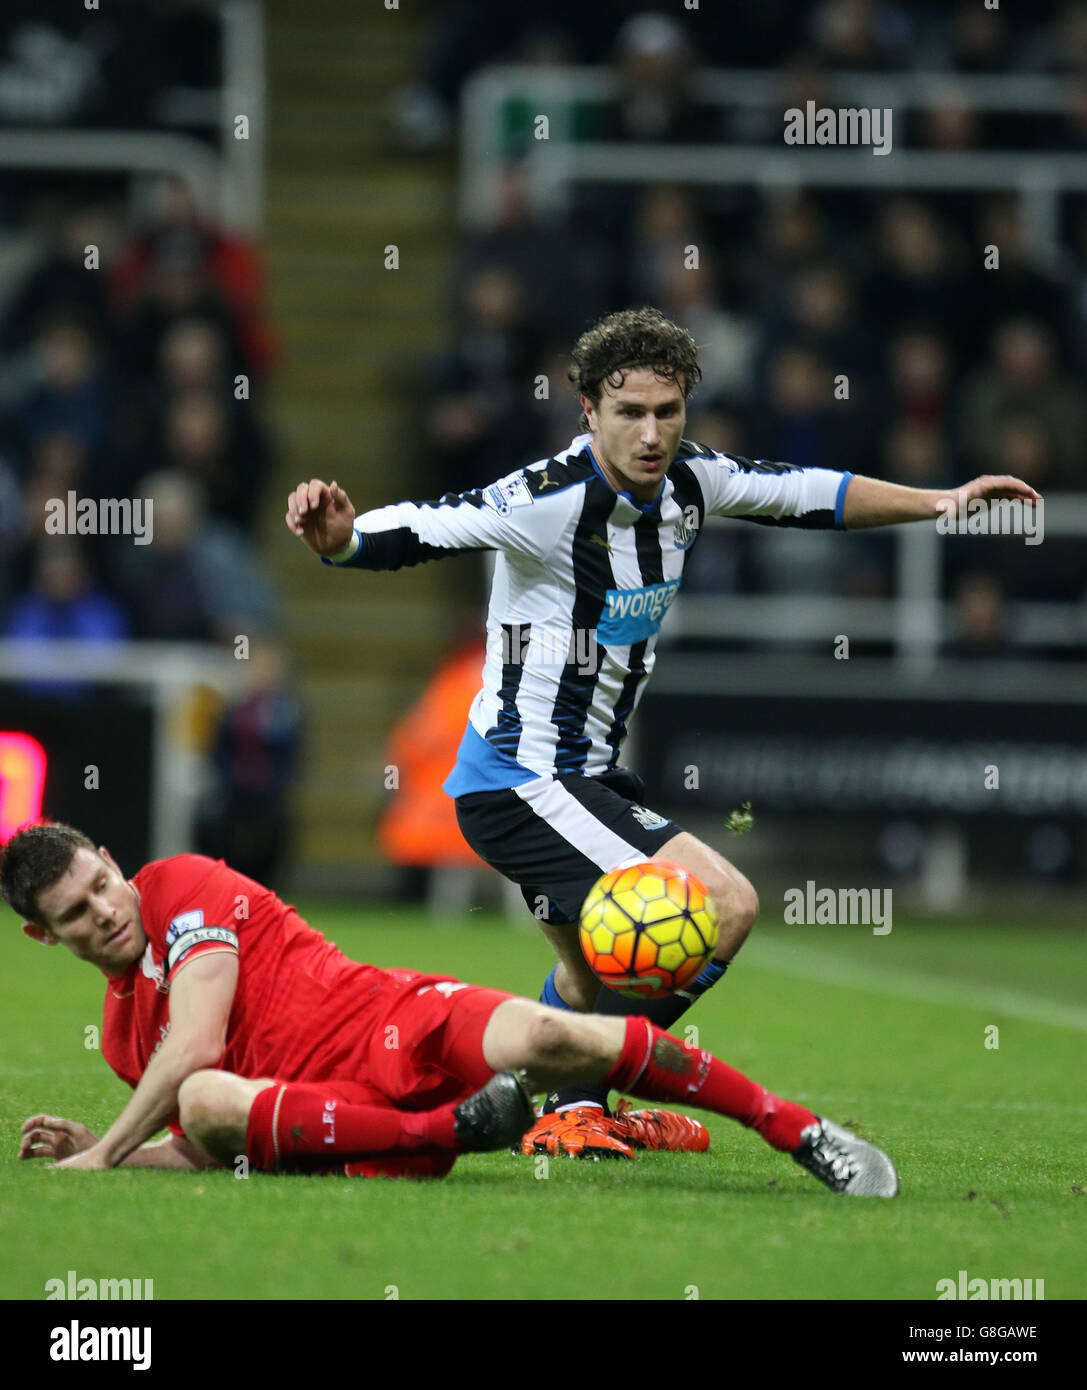 Newcastle United's Daryl Janmaat is tackled by Liverpool's James Milner (left) during the Barclays Premier League match at St James' Park, Newcastle. Stock Photo